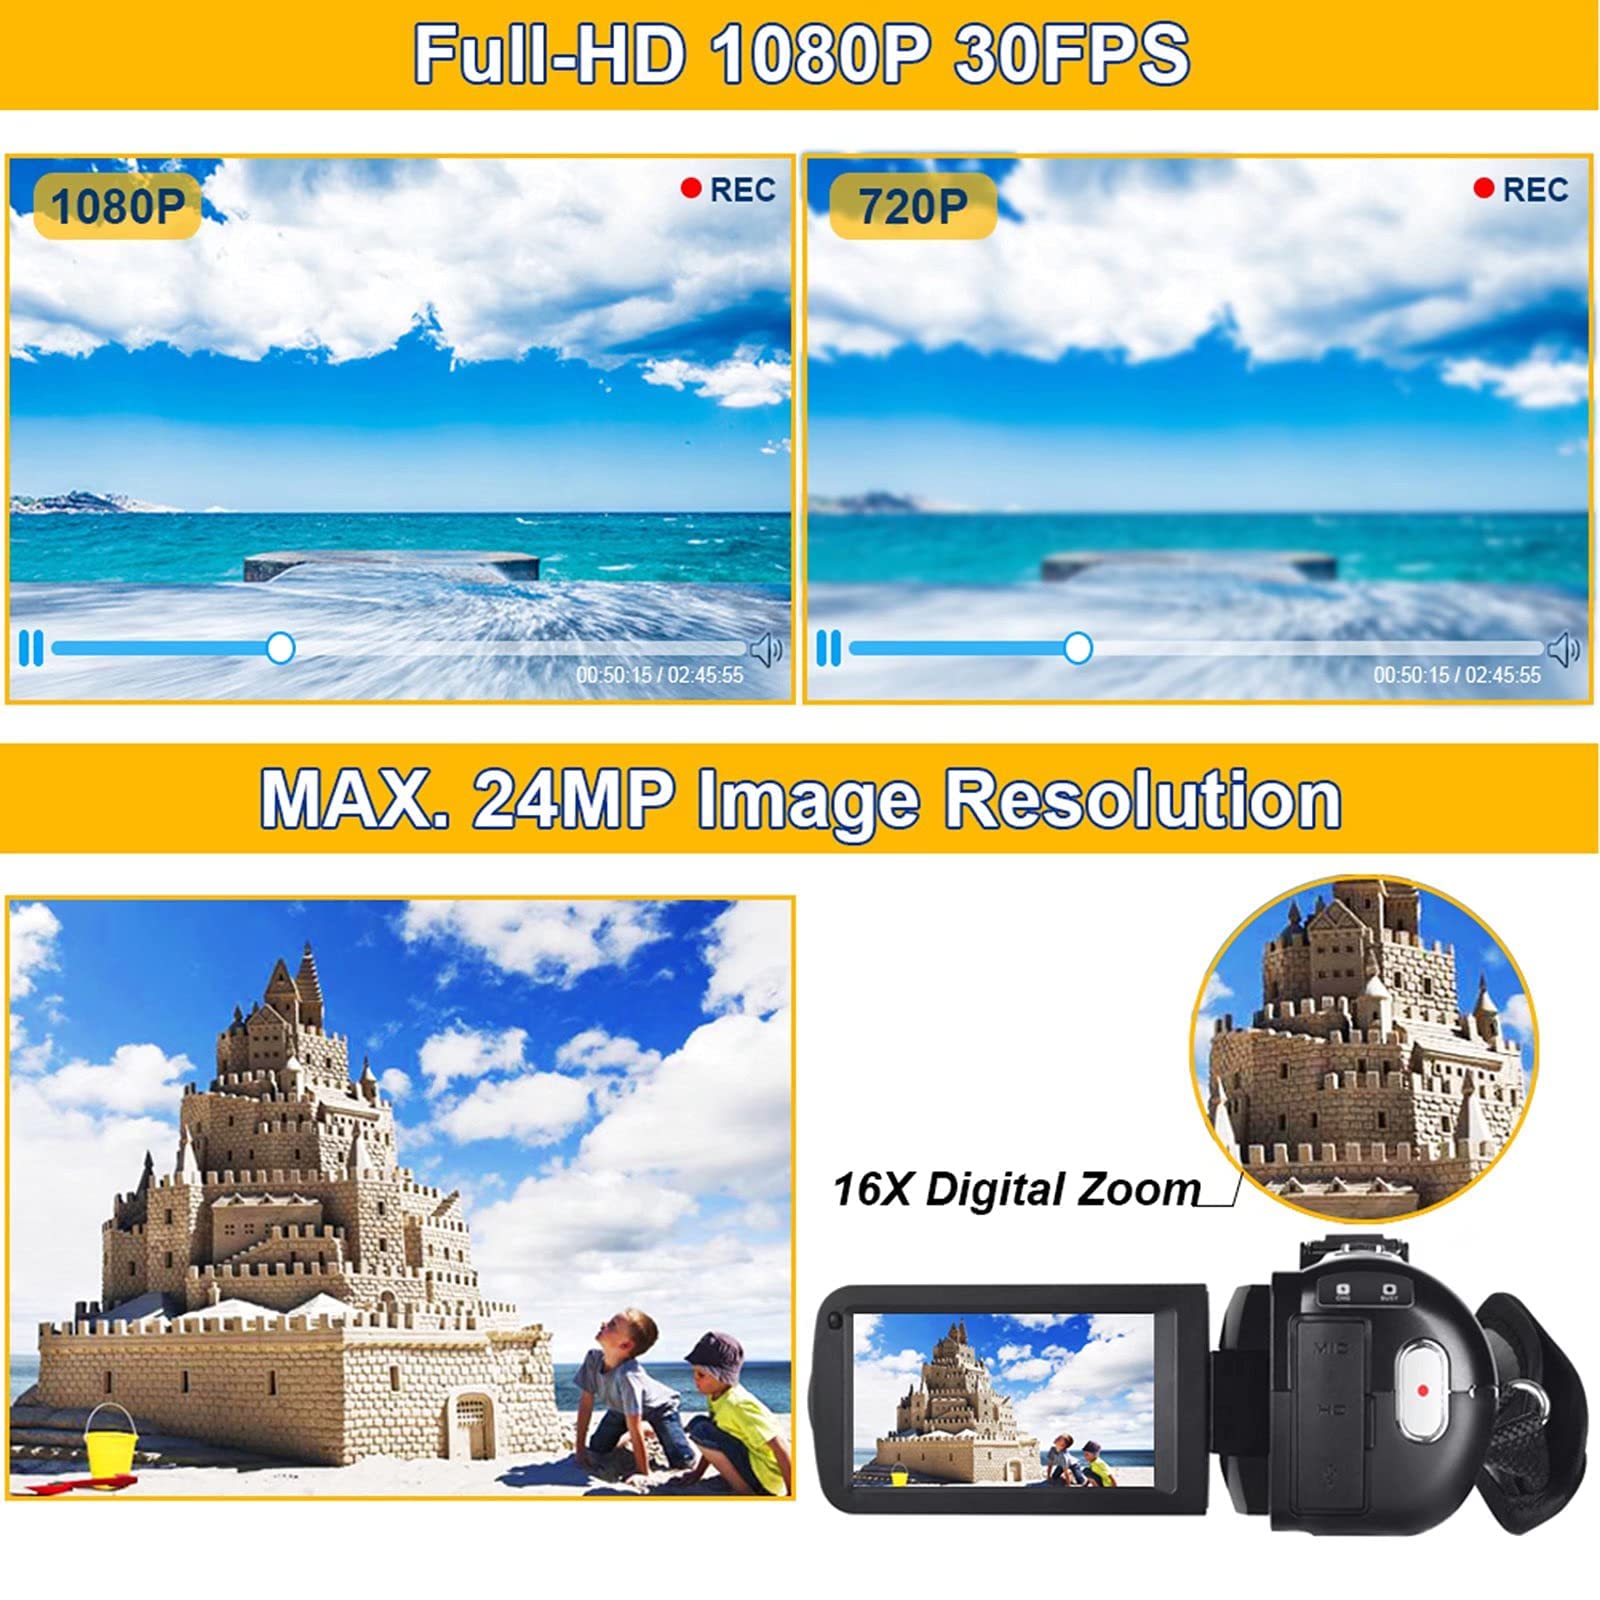 Video Camera Camcorder Full HD 1080P 30FPS 24.0 MP IR Night Vision Vlogging Camera Recorder 3.0 Inch IPS Screen 16X Zoom Camcorders Remote Control with 2 Batteries